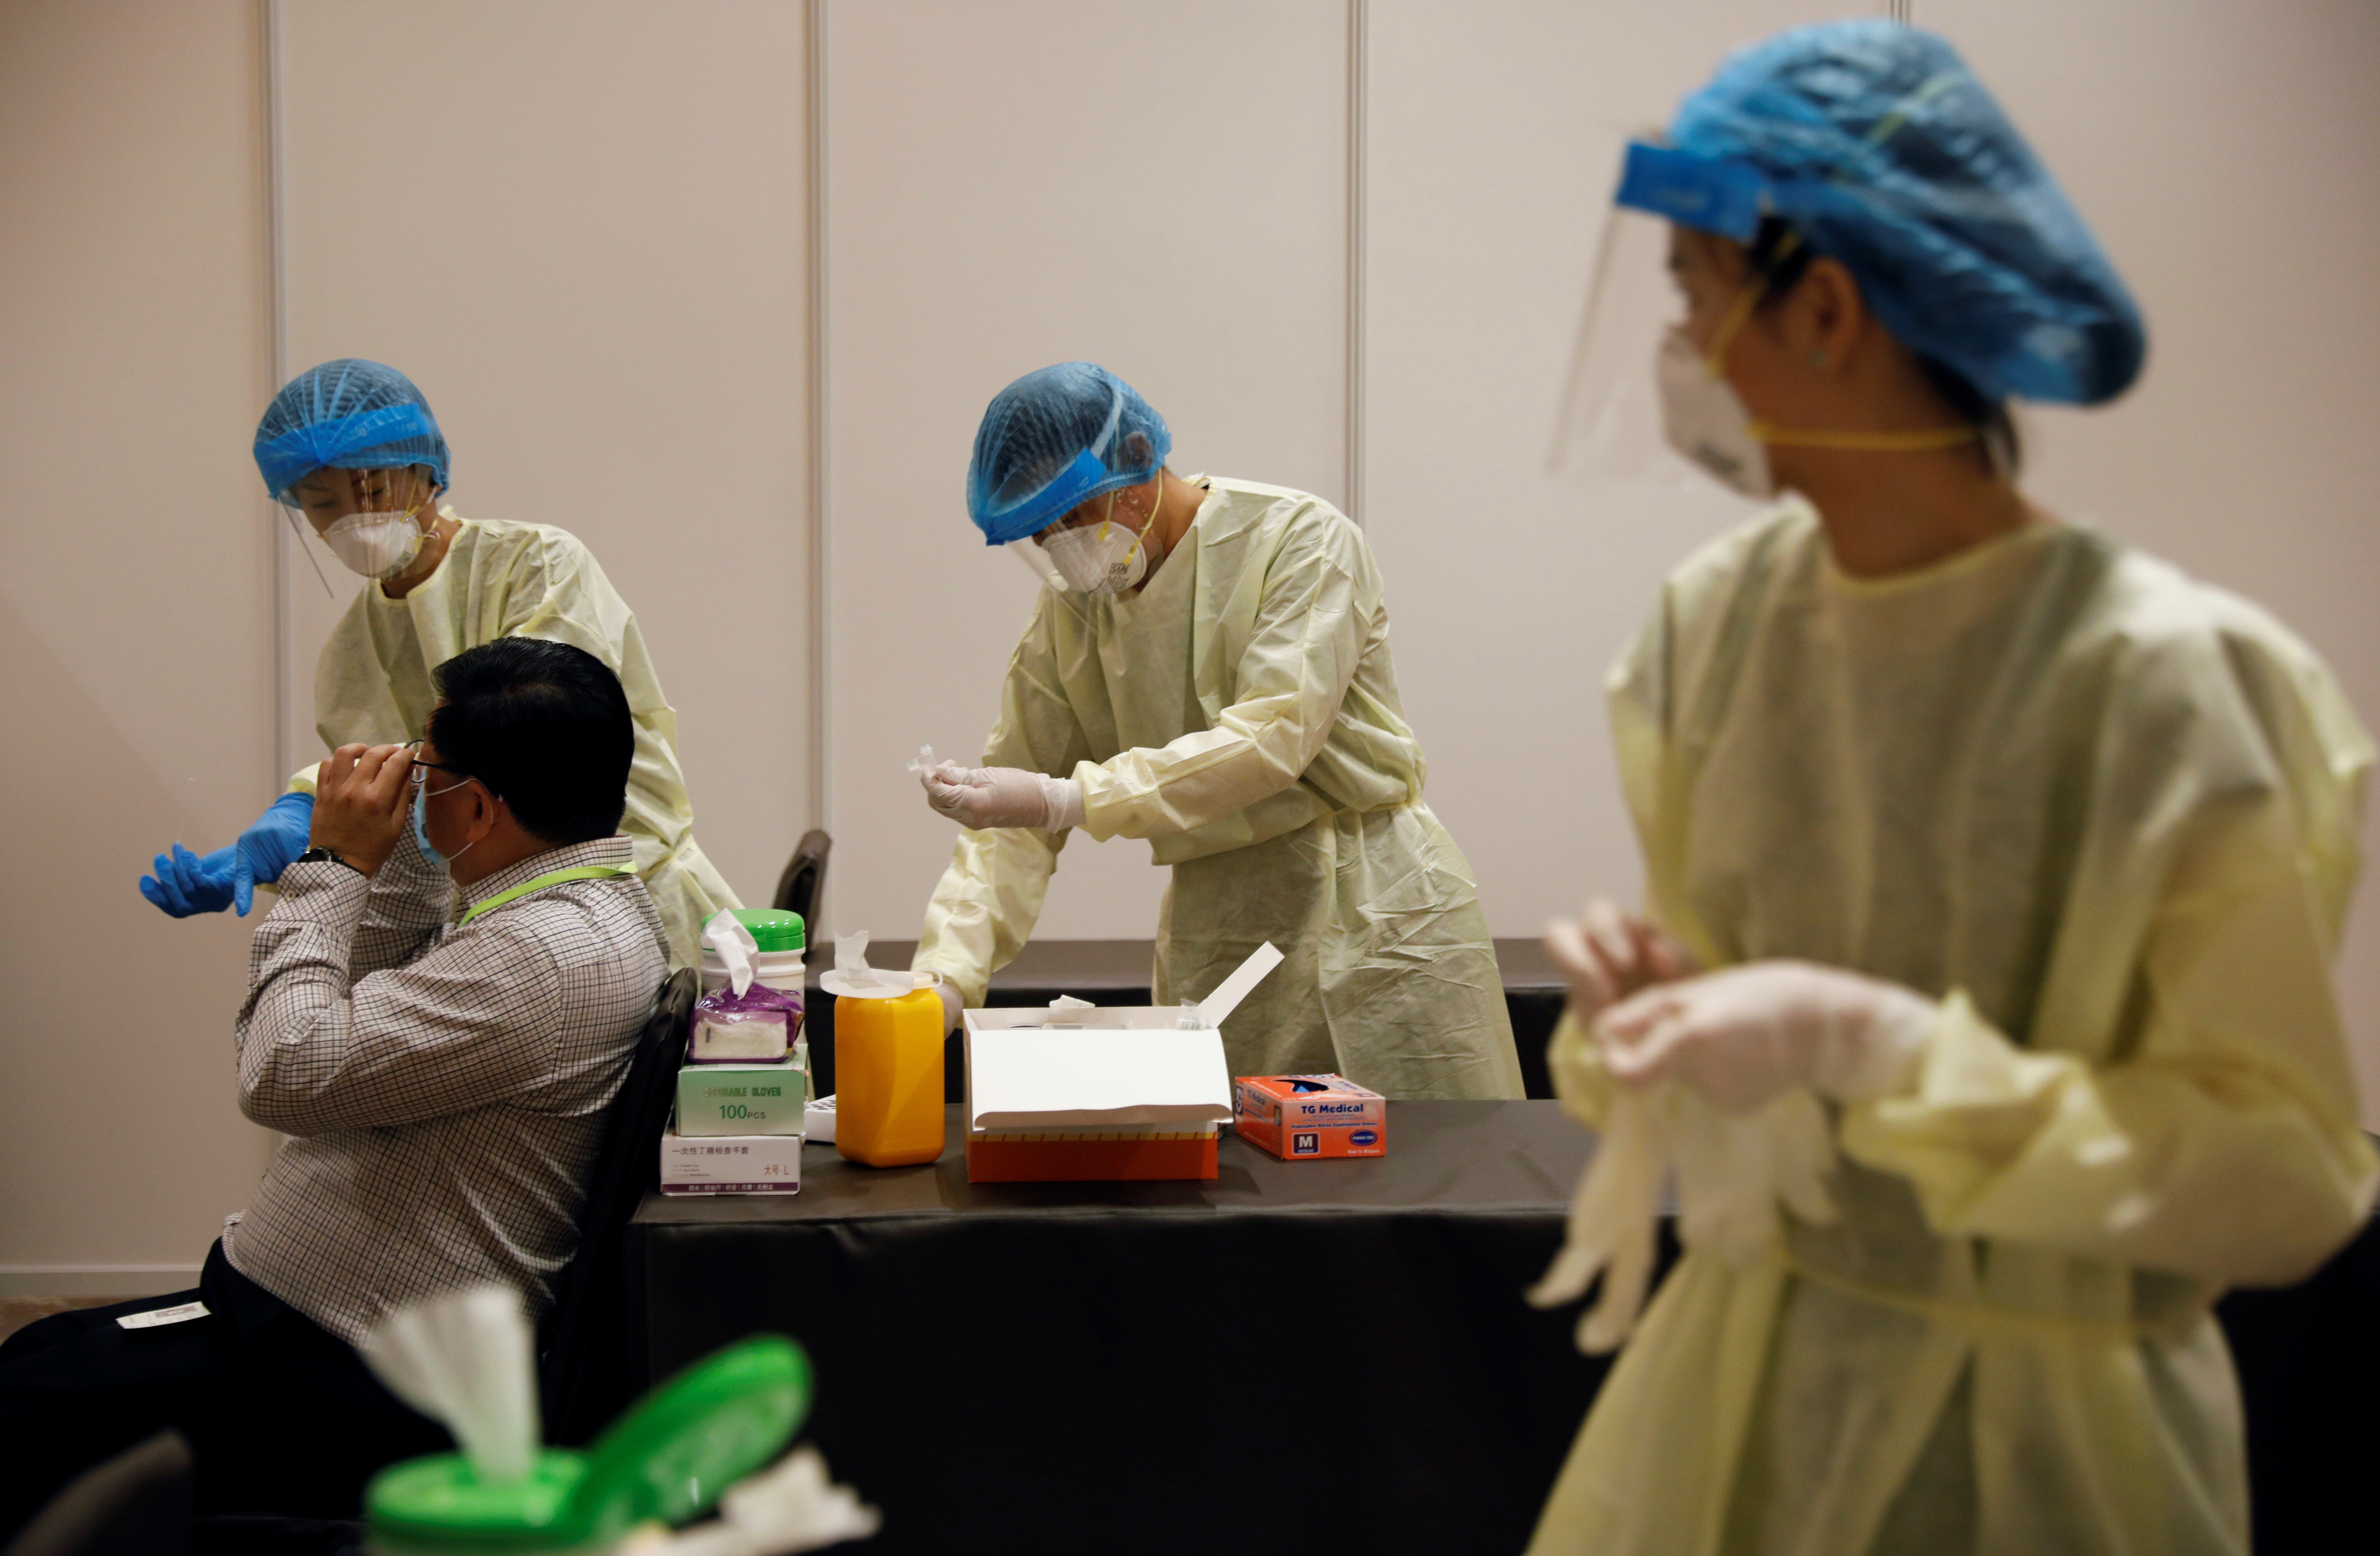 An attendee receives a nose swab as part of a coronavirus disease (COVID-19) antigen rapid test before a conference held by the Institute of Policy Studies at Marina Bay Sands Convention Centre in Singapore January 25, 2021.